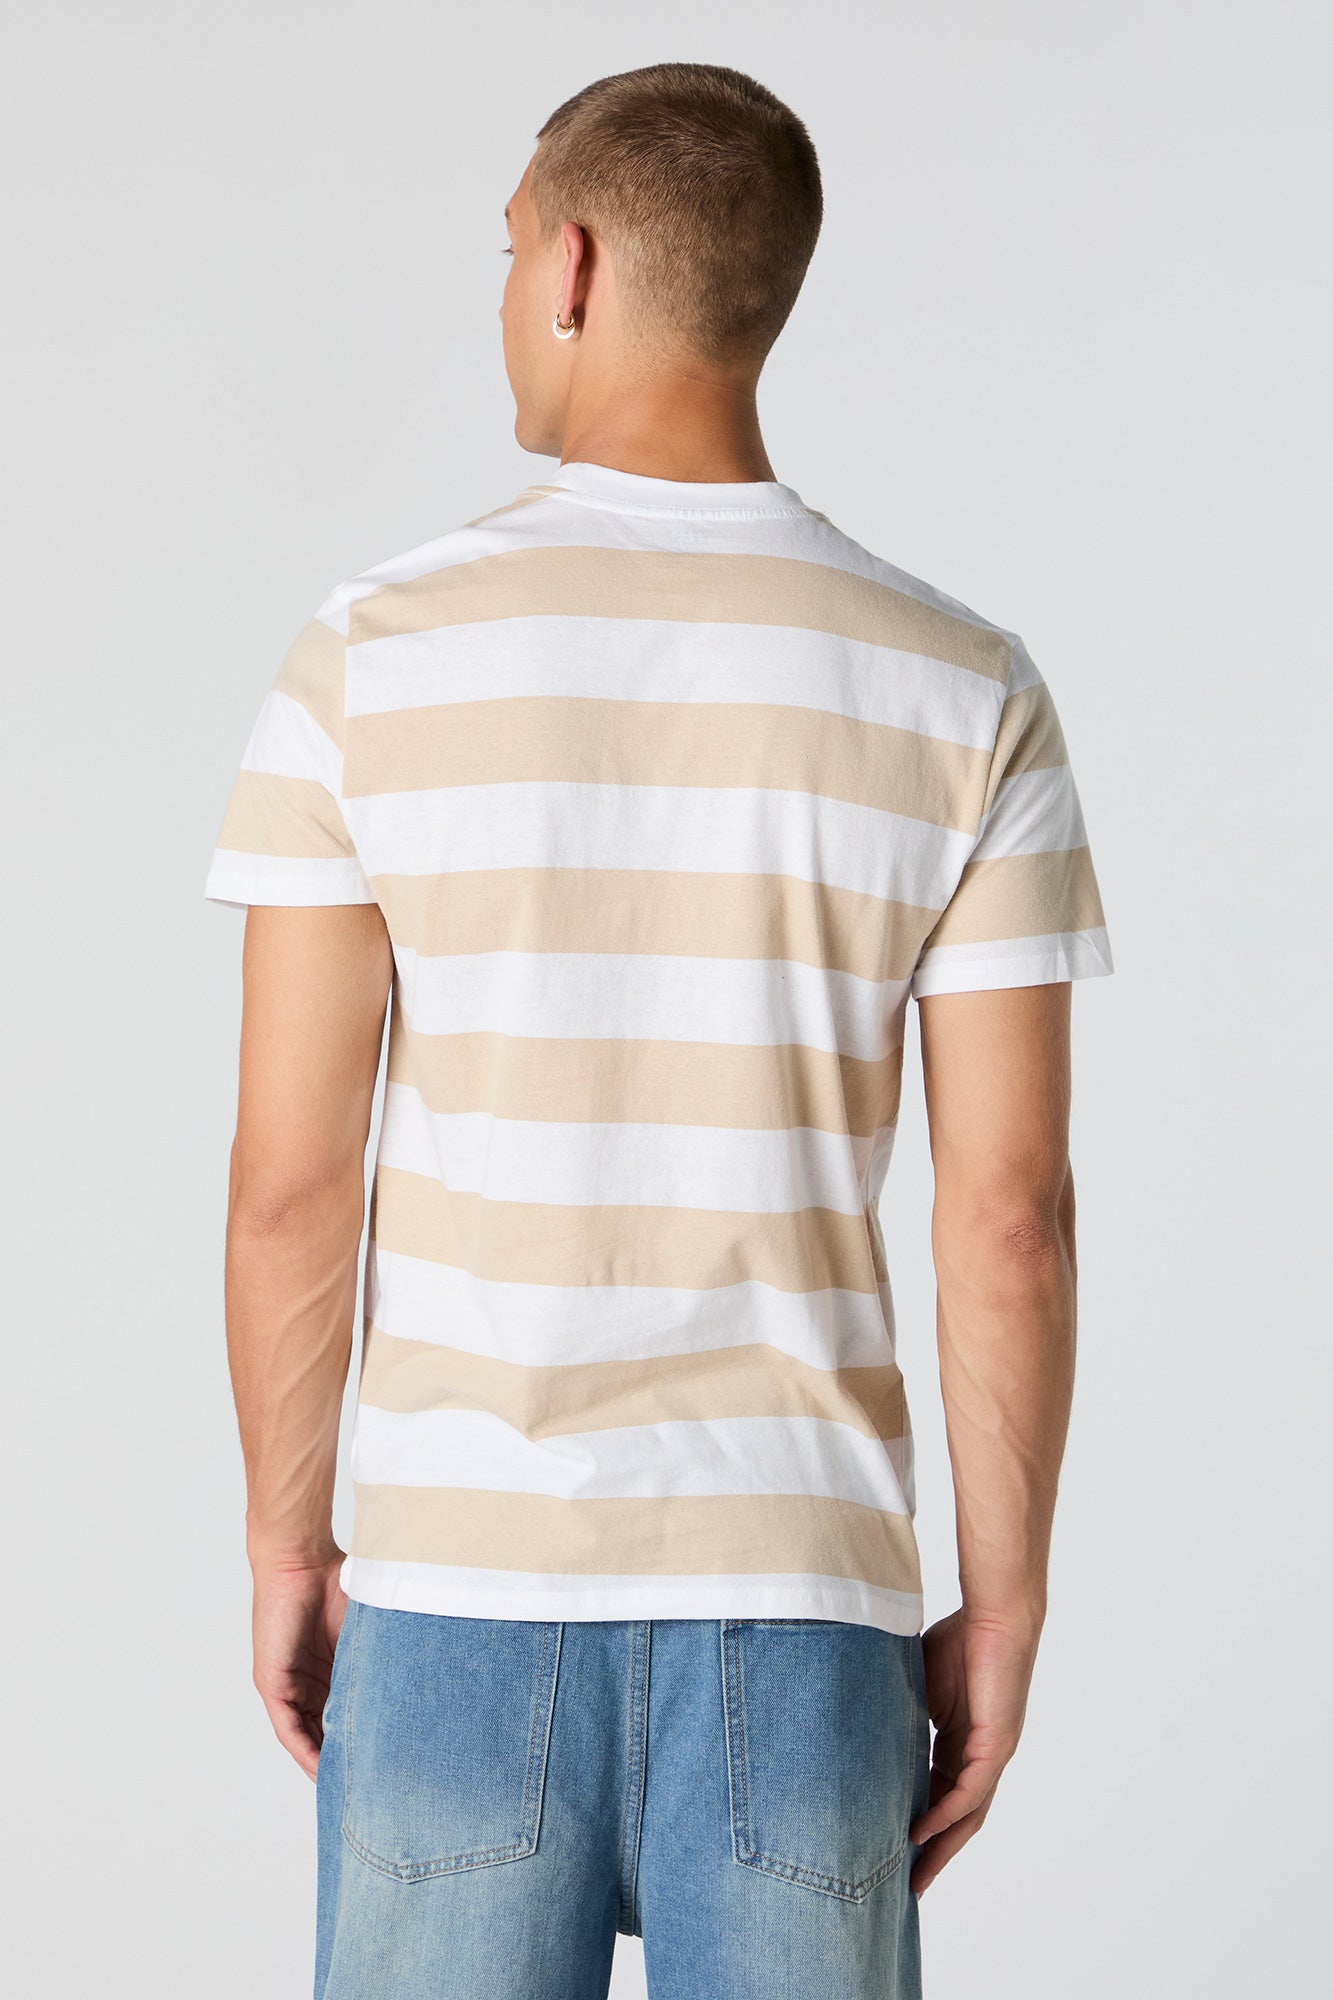 Oakland Graphic Striped -Shirt